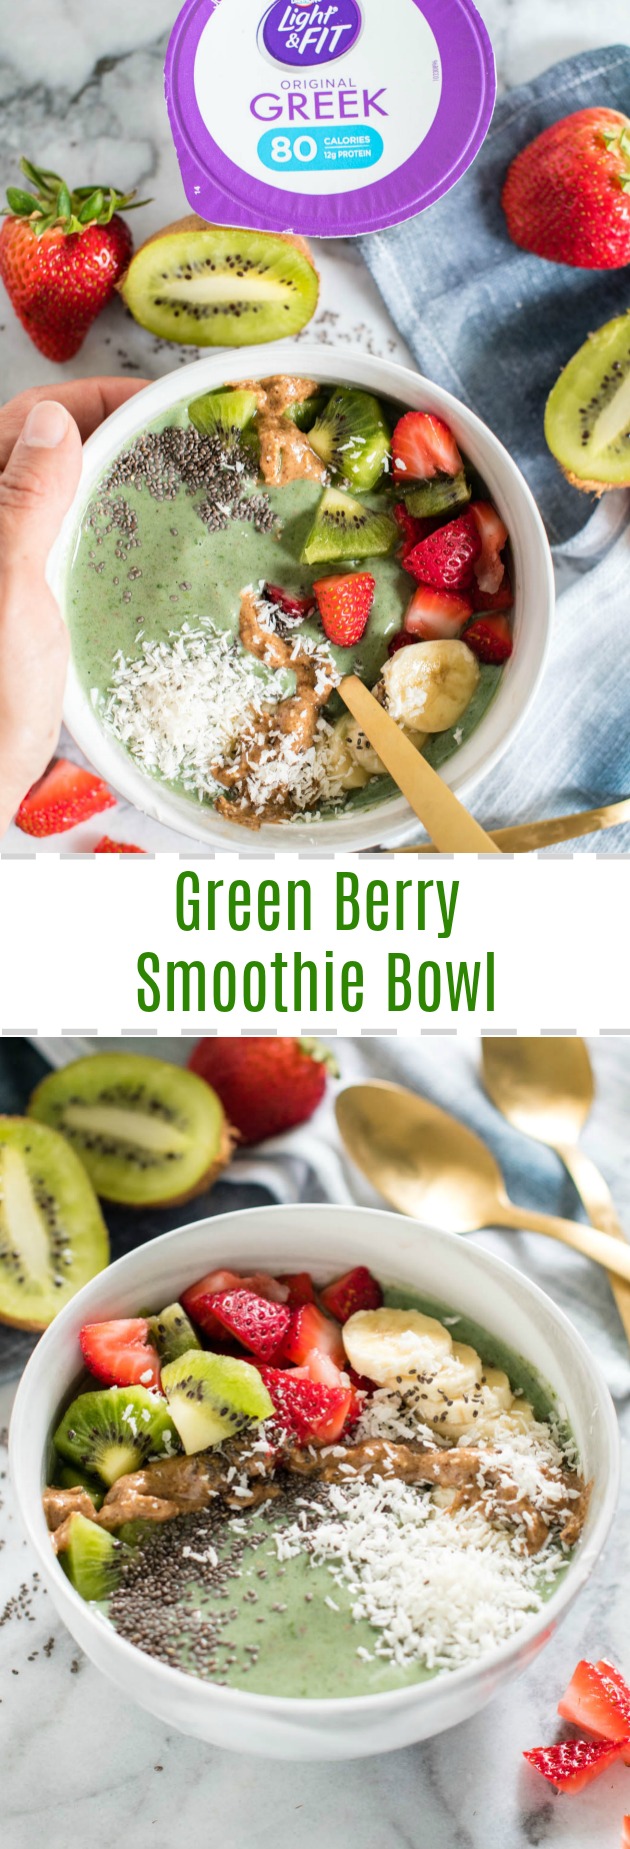 Green Berry Smoothie Bowl